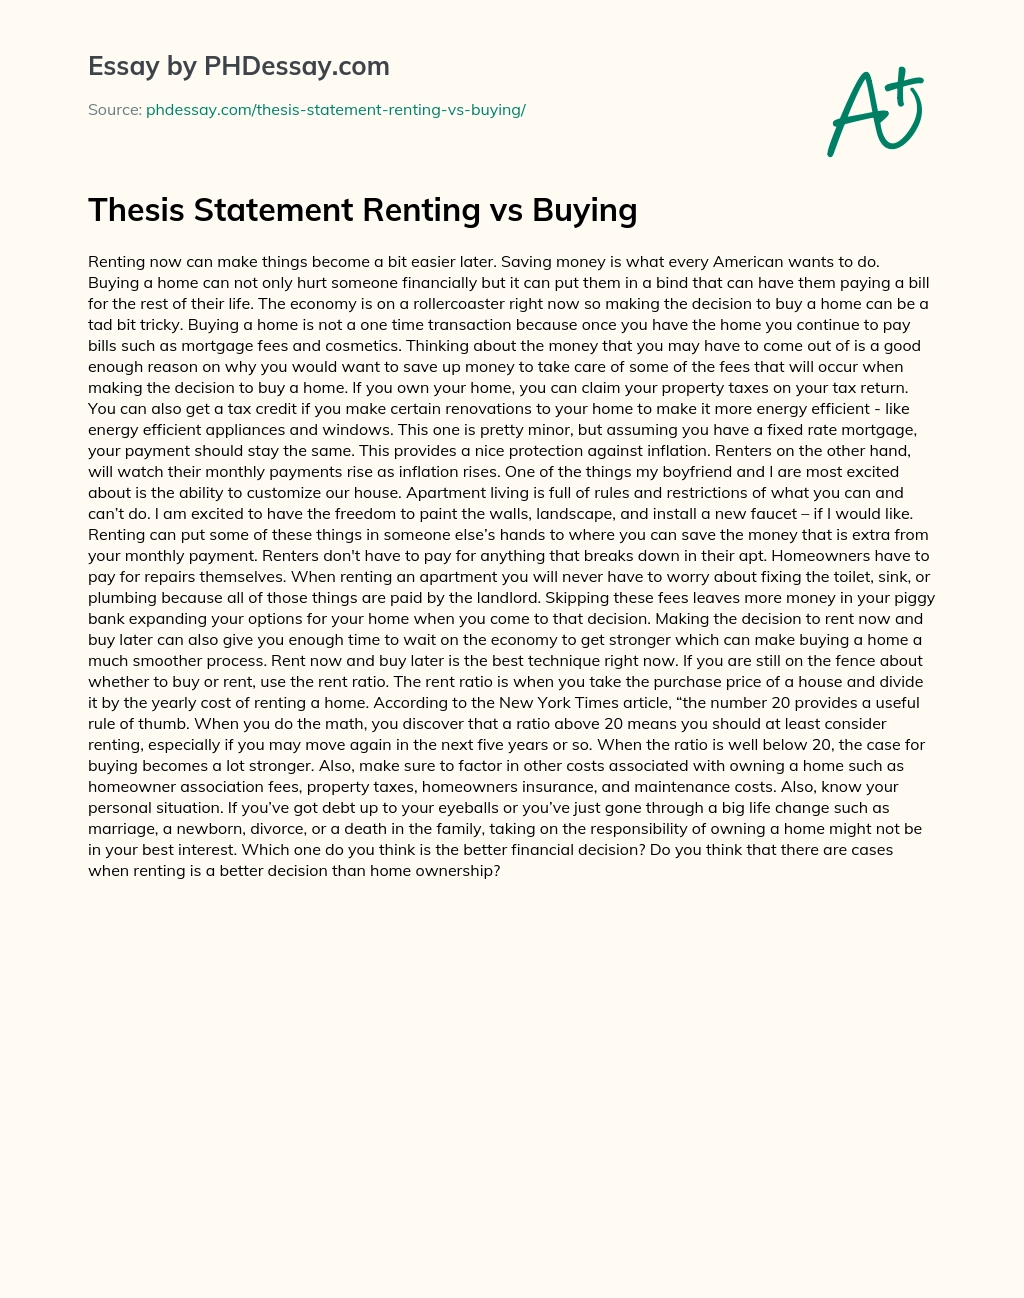 Thesis Statement Renting vs Buying essay